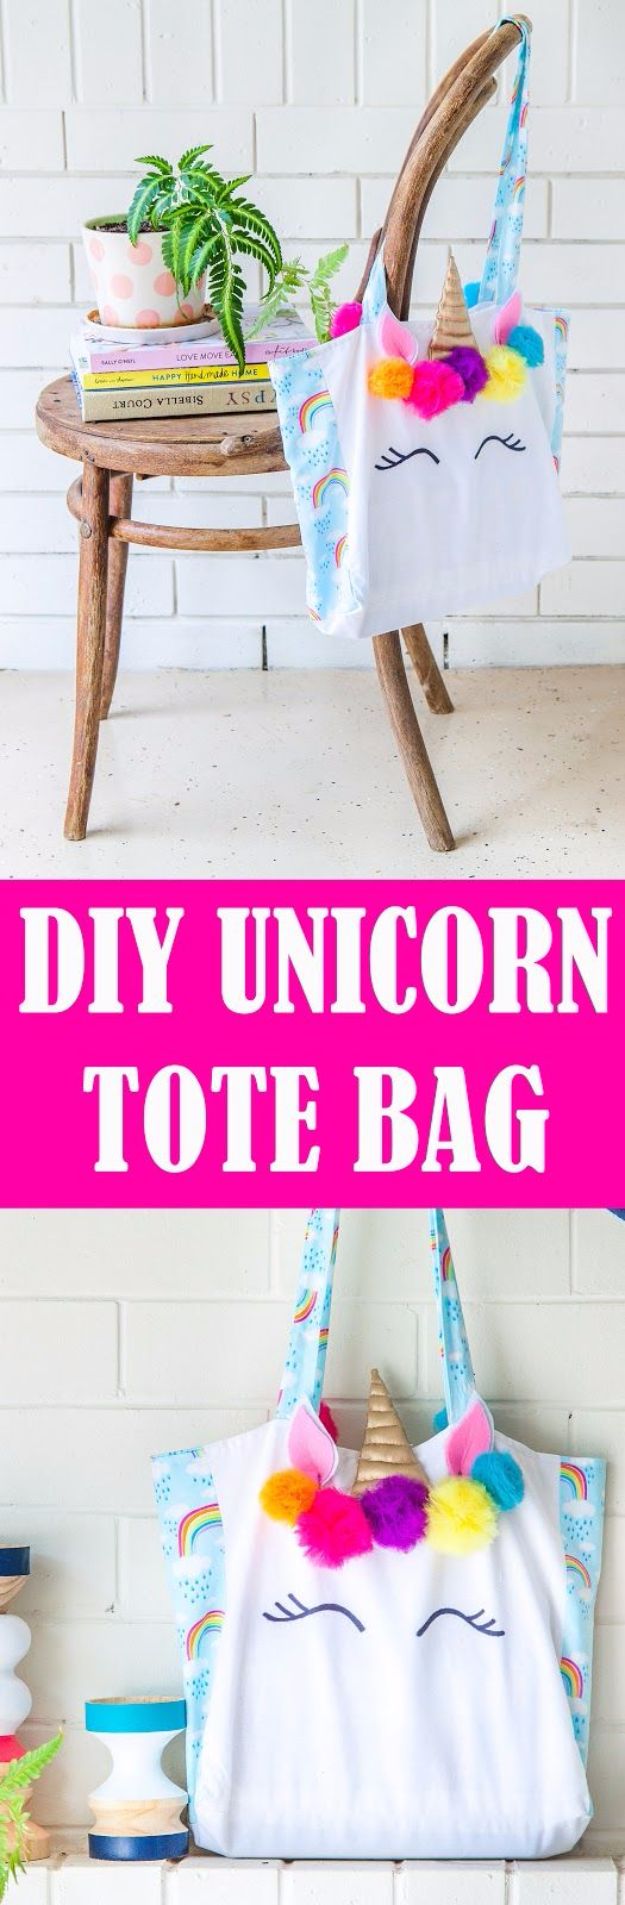 DIY Ideas With Unicorns - Unicorn Tote Bag - Cute and Easy DIY Projects for Unicorn Lovers - Wall and Home Decor Projects, Things To Make and Sell on Etsy - Quick Gifts to Make for Friends and Family - Homemade No Sew Projects and Pillows - Fun Jewelry, Desk Decor Cool Clothes and Accessories